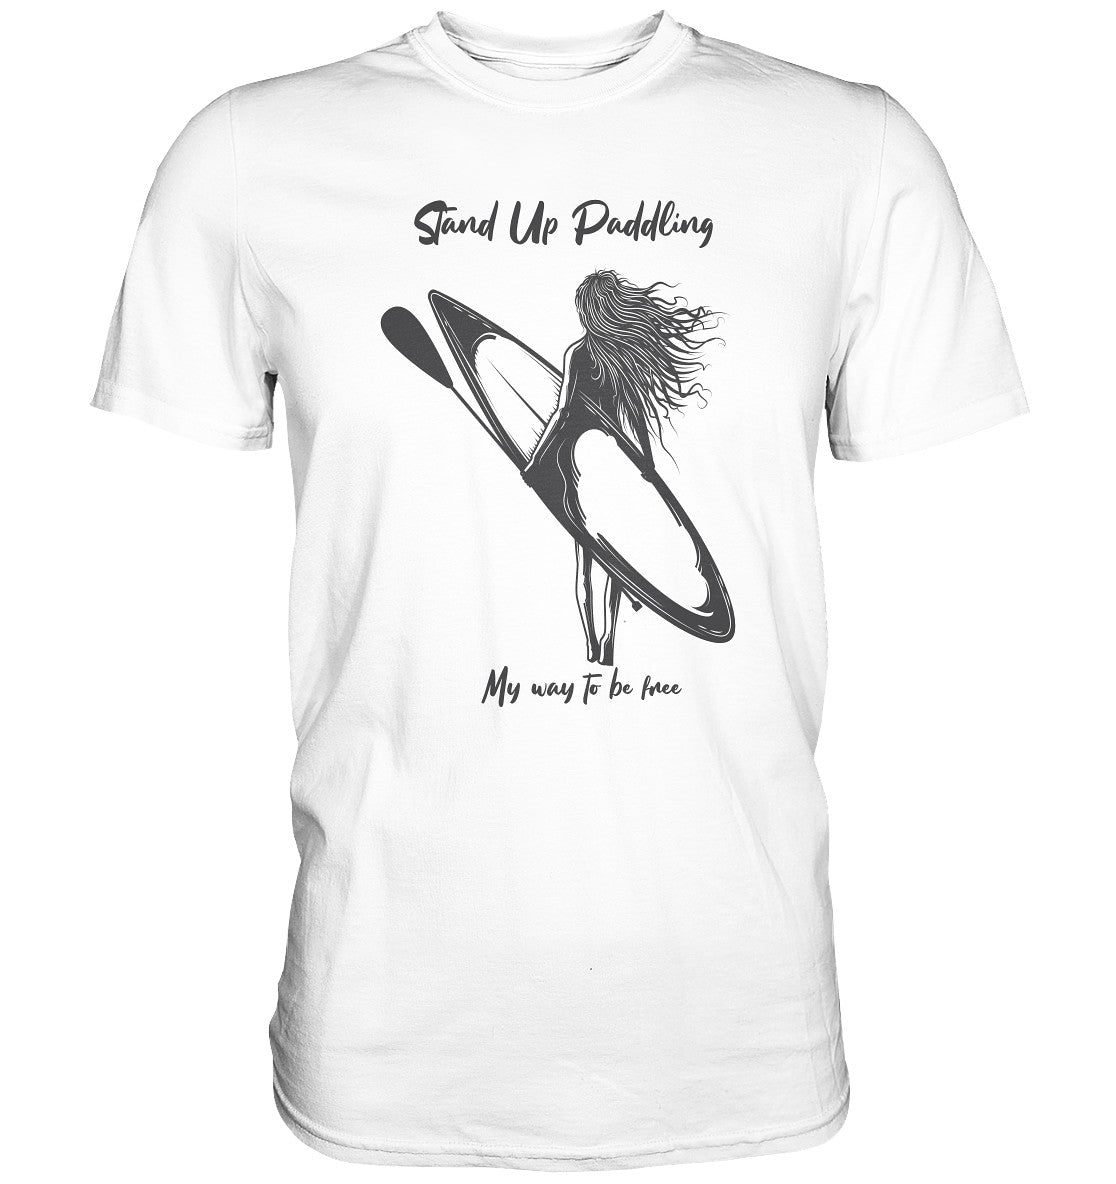 Stand Up Paddling- My way to be free - Classic Shirt